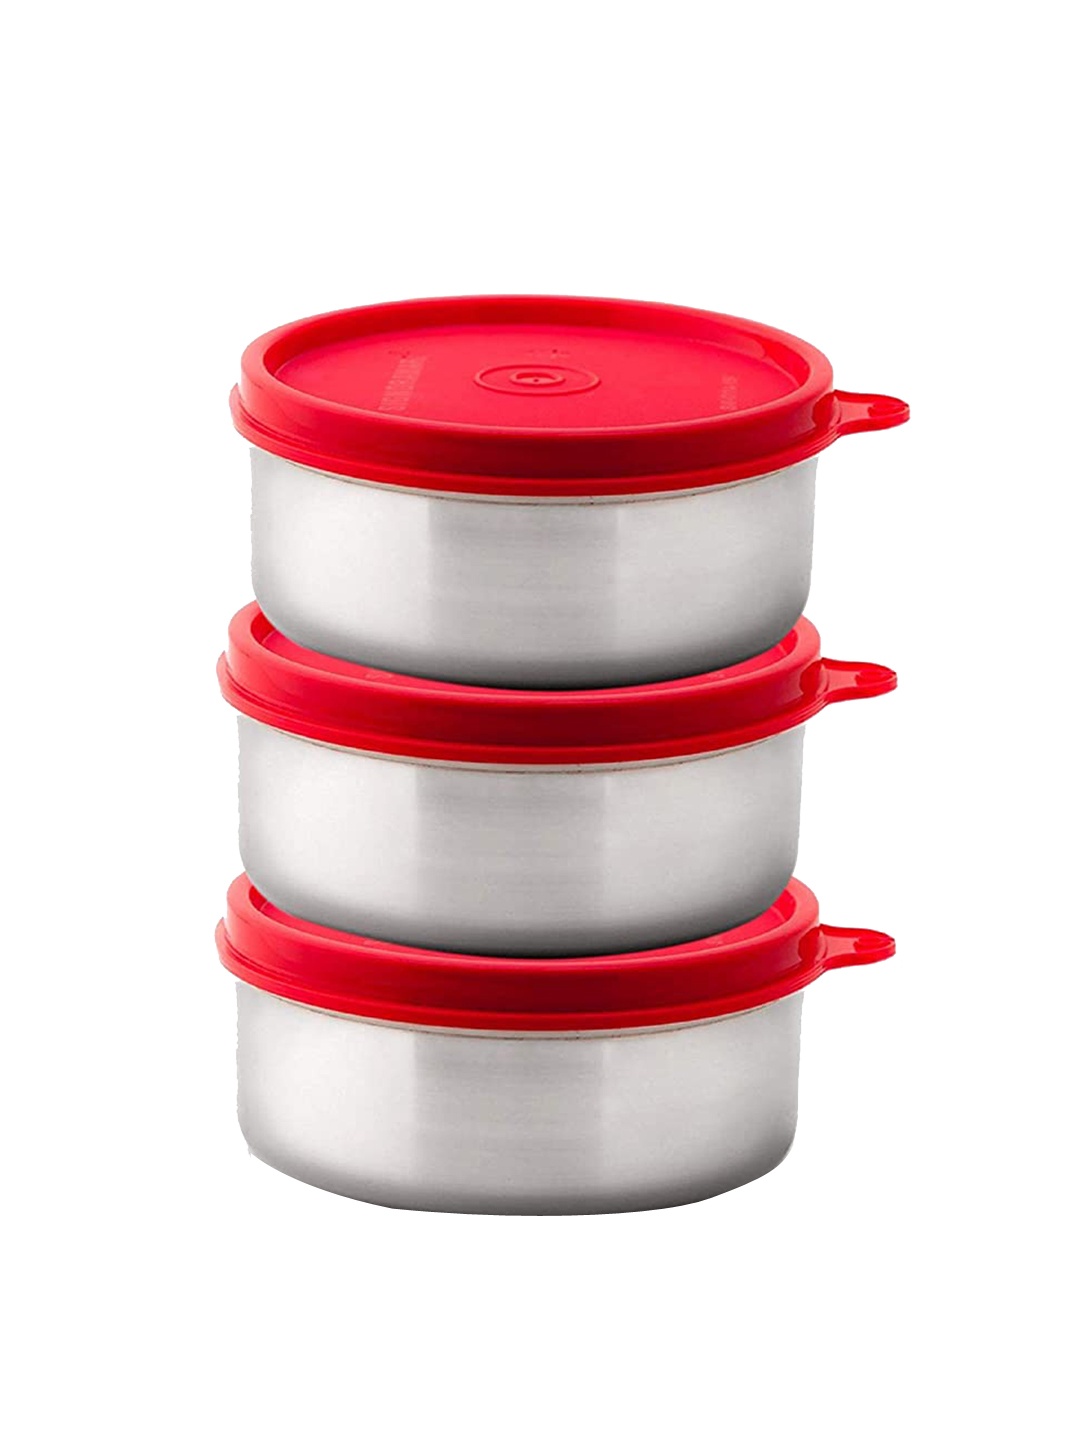 

SignoraWare Set of 3 Red Steel Food Container